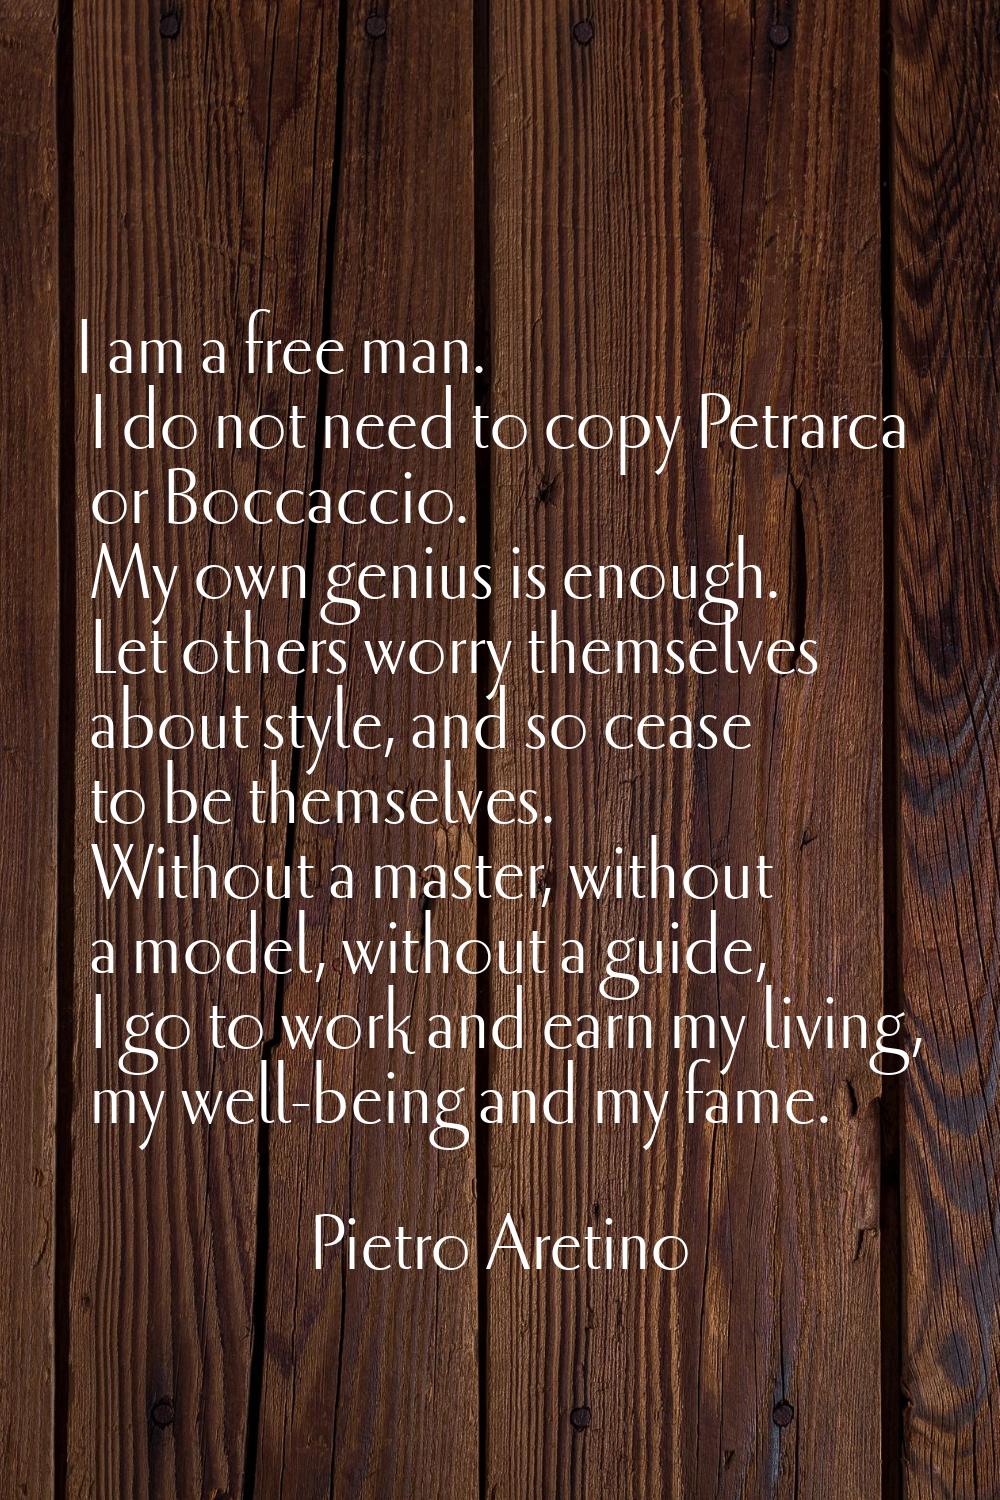 I am a free man. I do not need to copy Petrarca or Boccaccio. My own genius is enough. Let others w